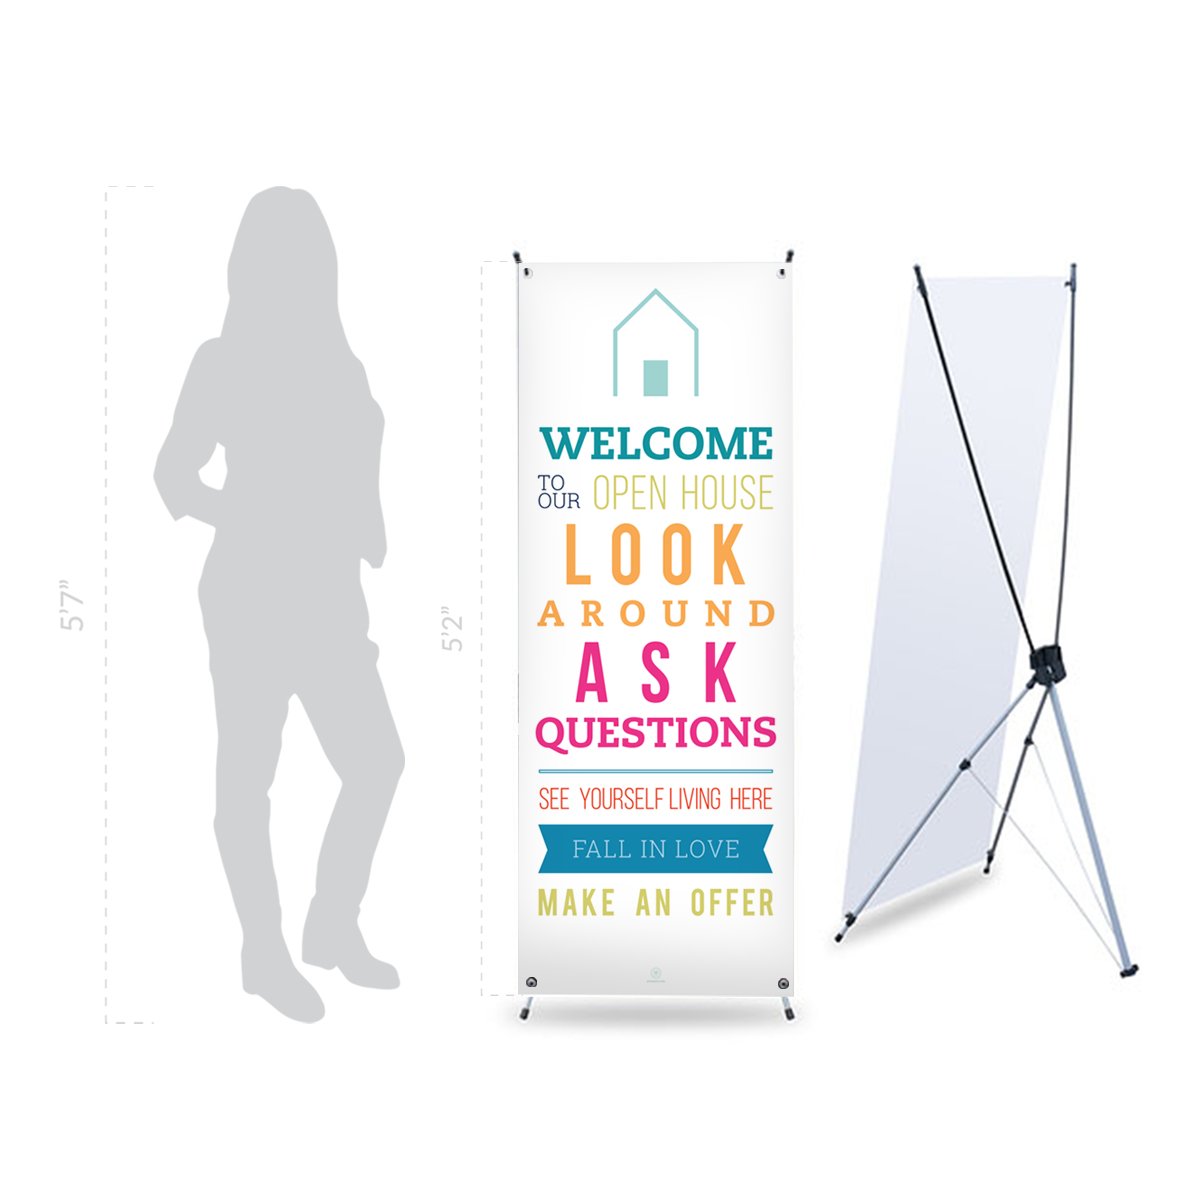 Open House Banner No. 4 - With Stand - All Things Real Estate